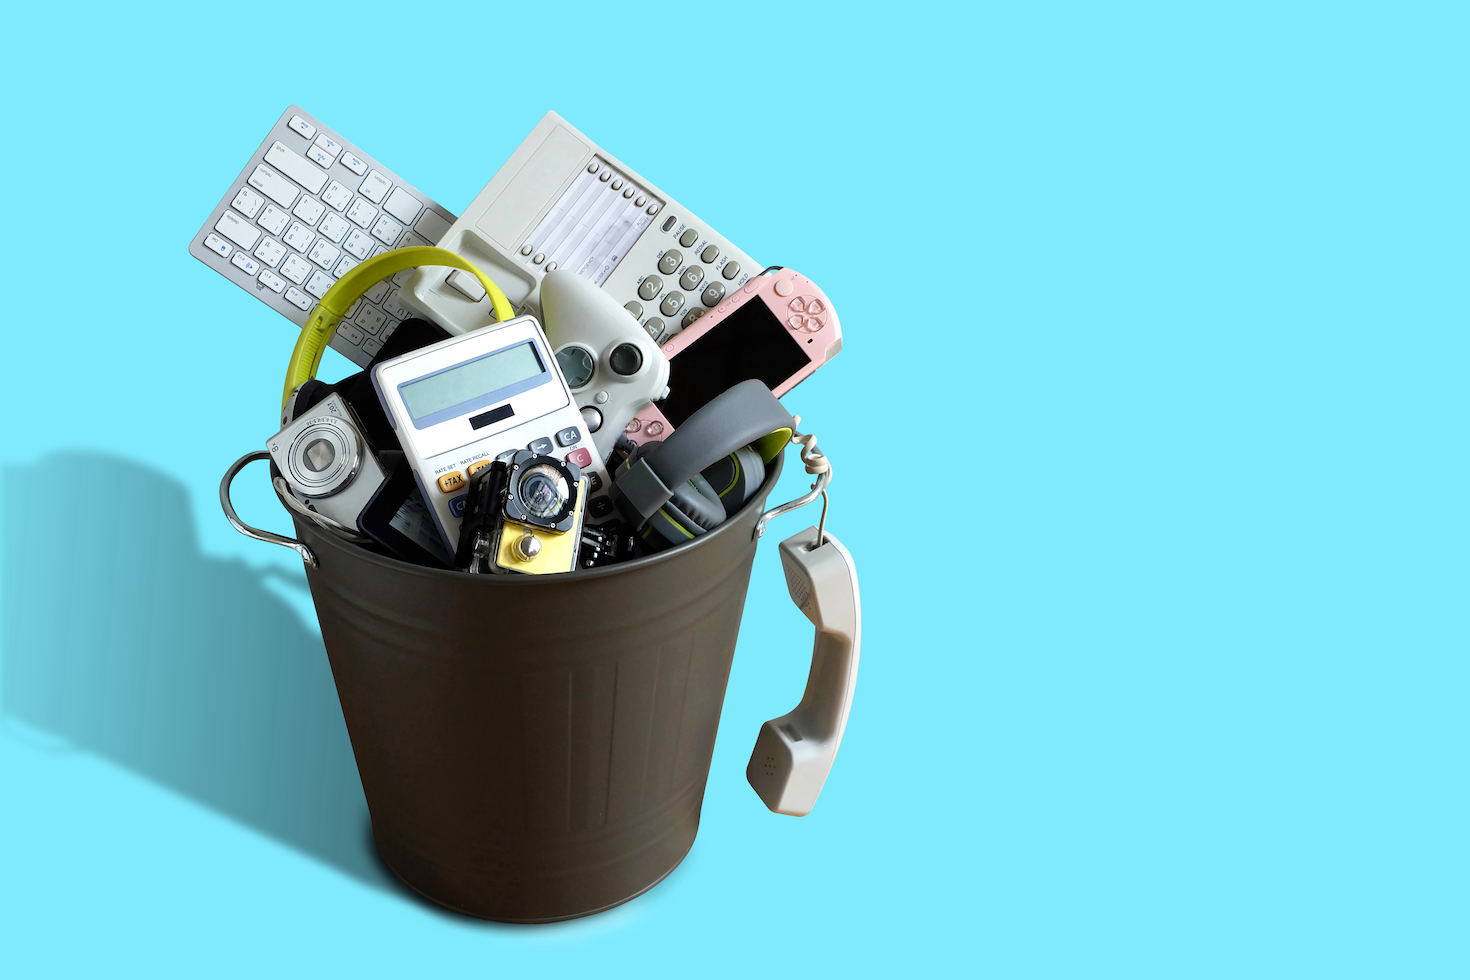 The big alternative of e-waste recycling